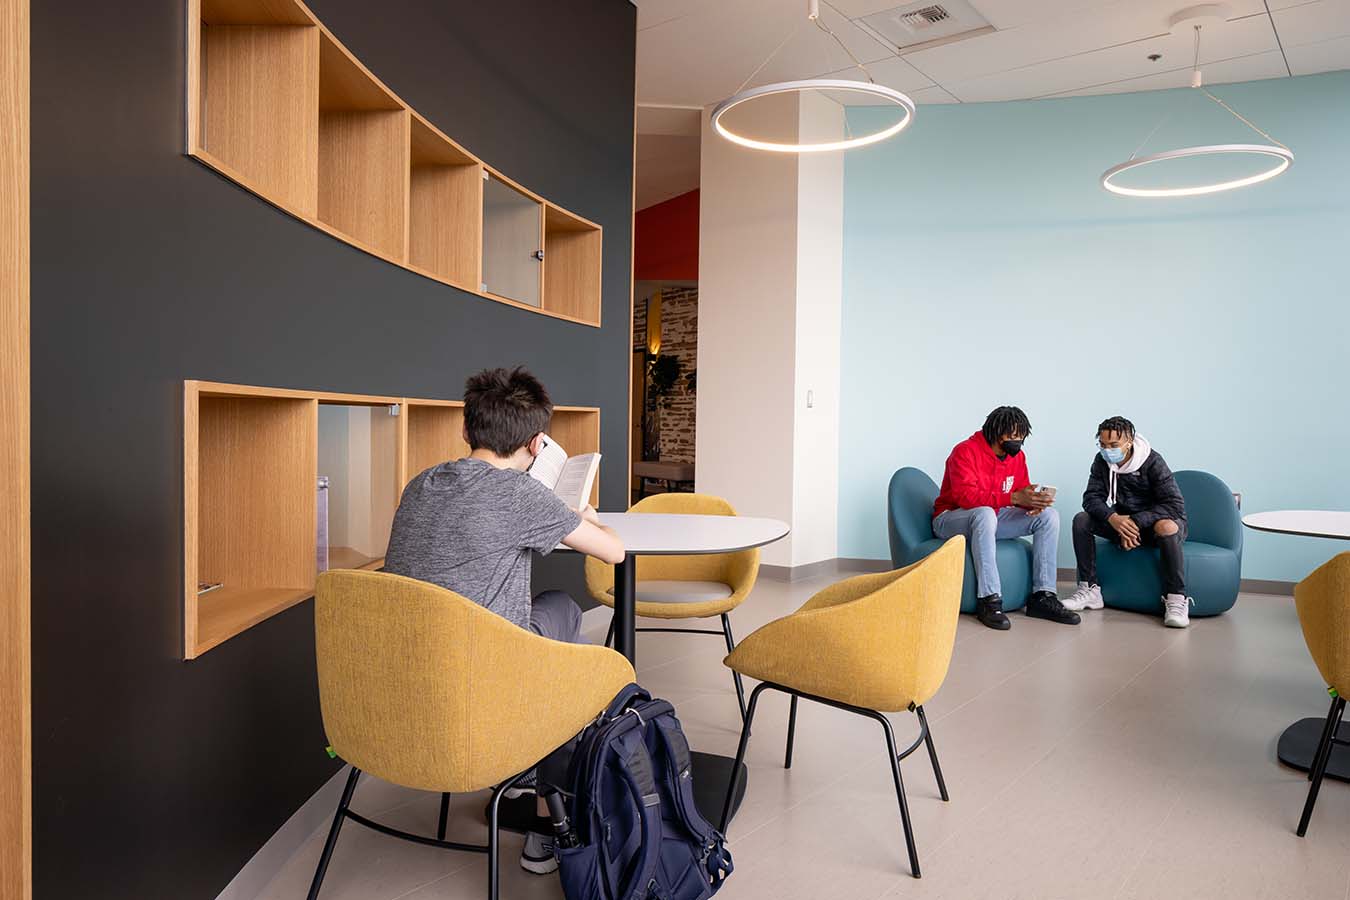 Students study in a lobby